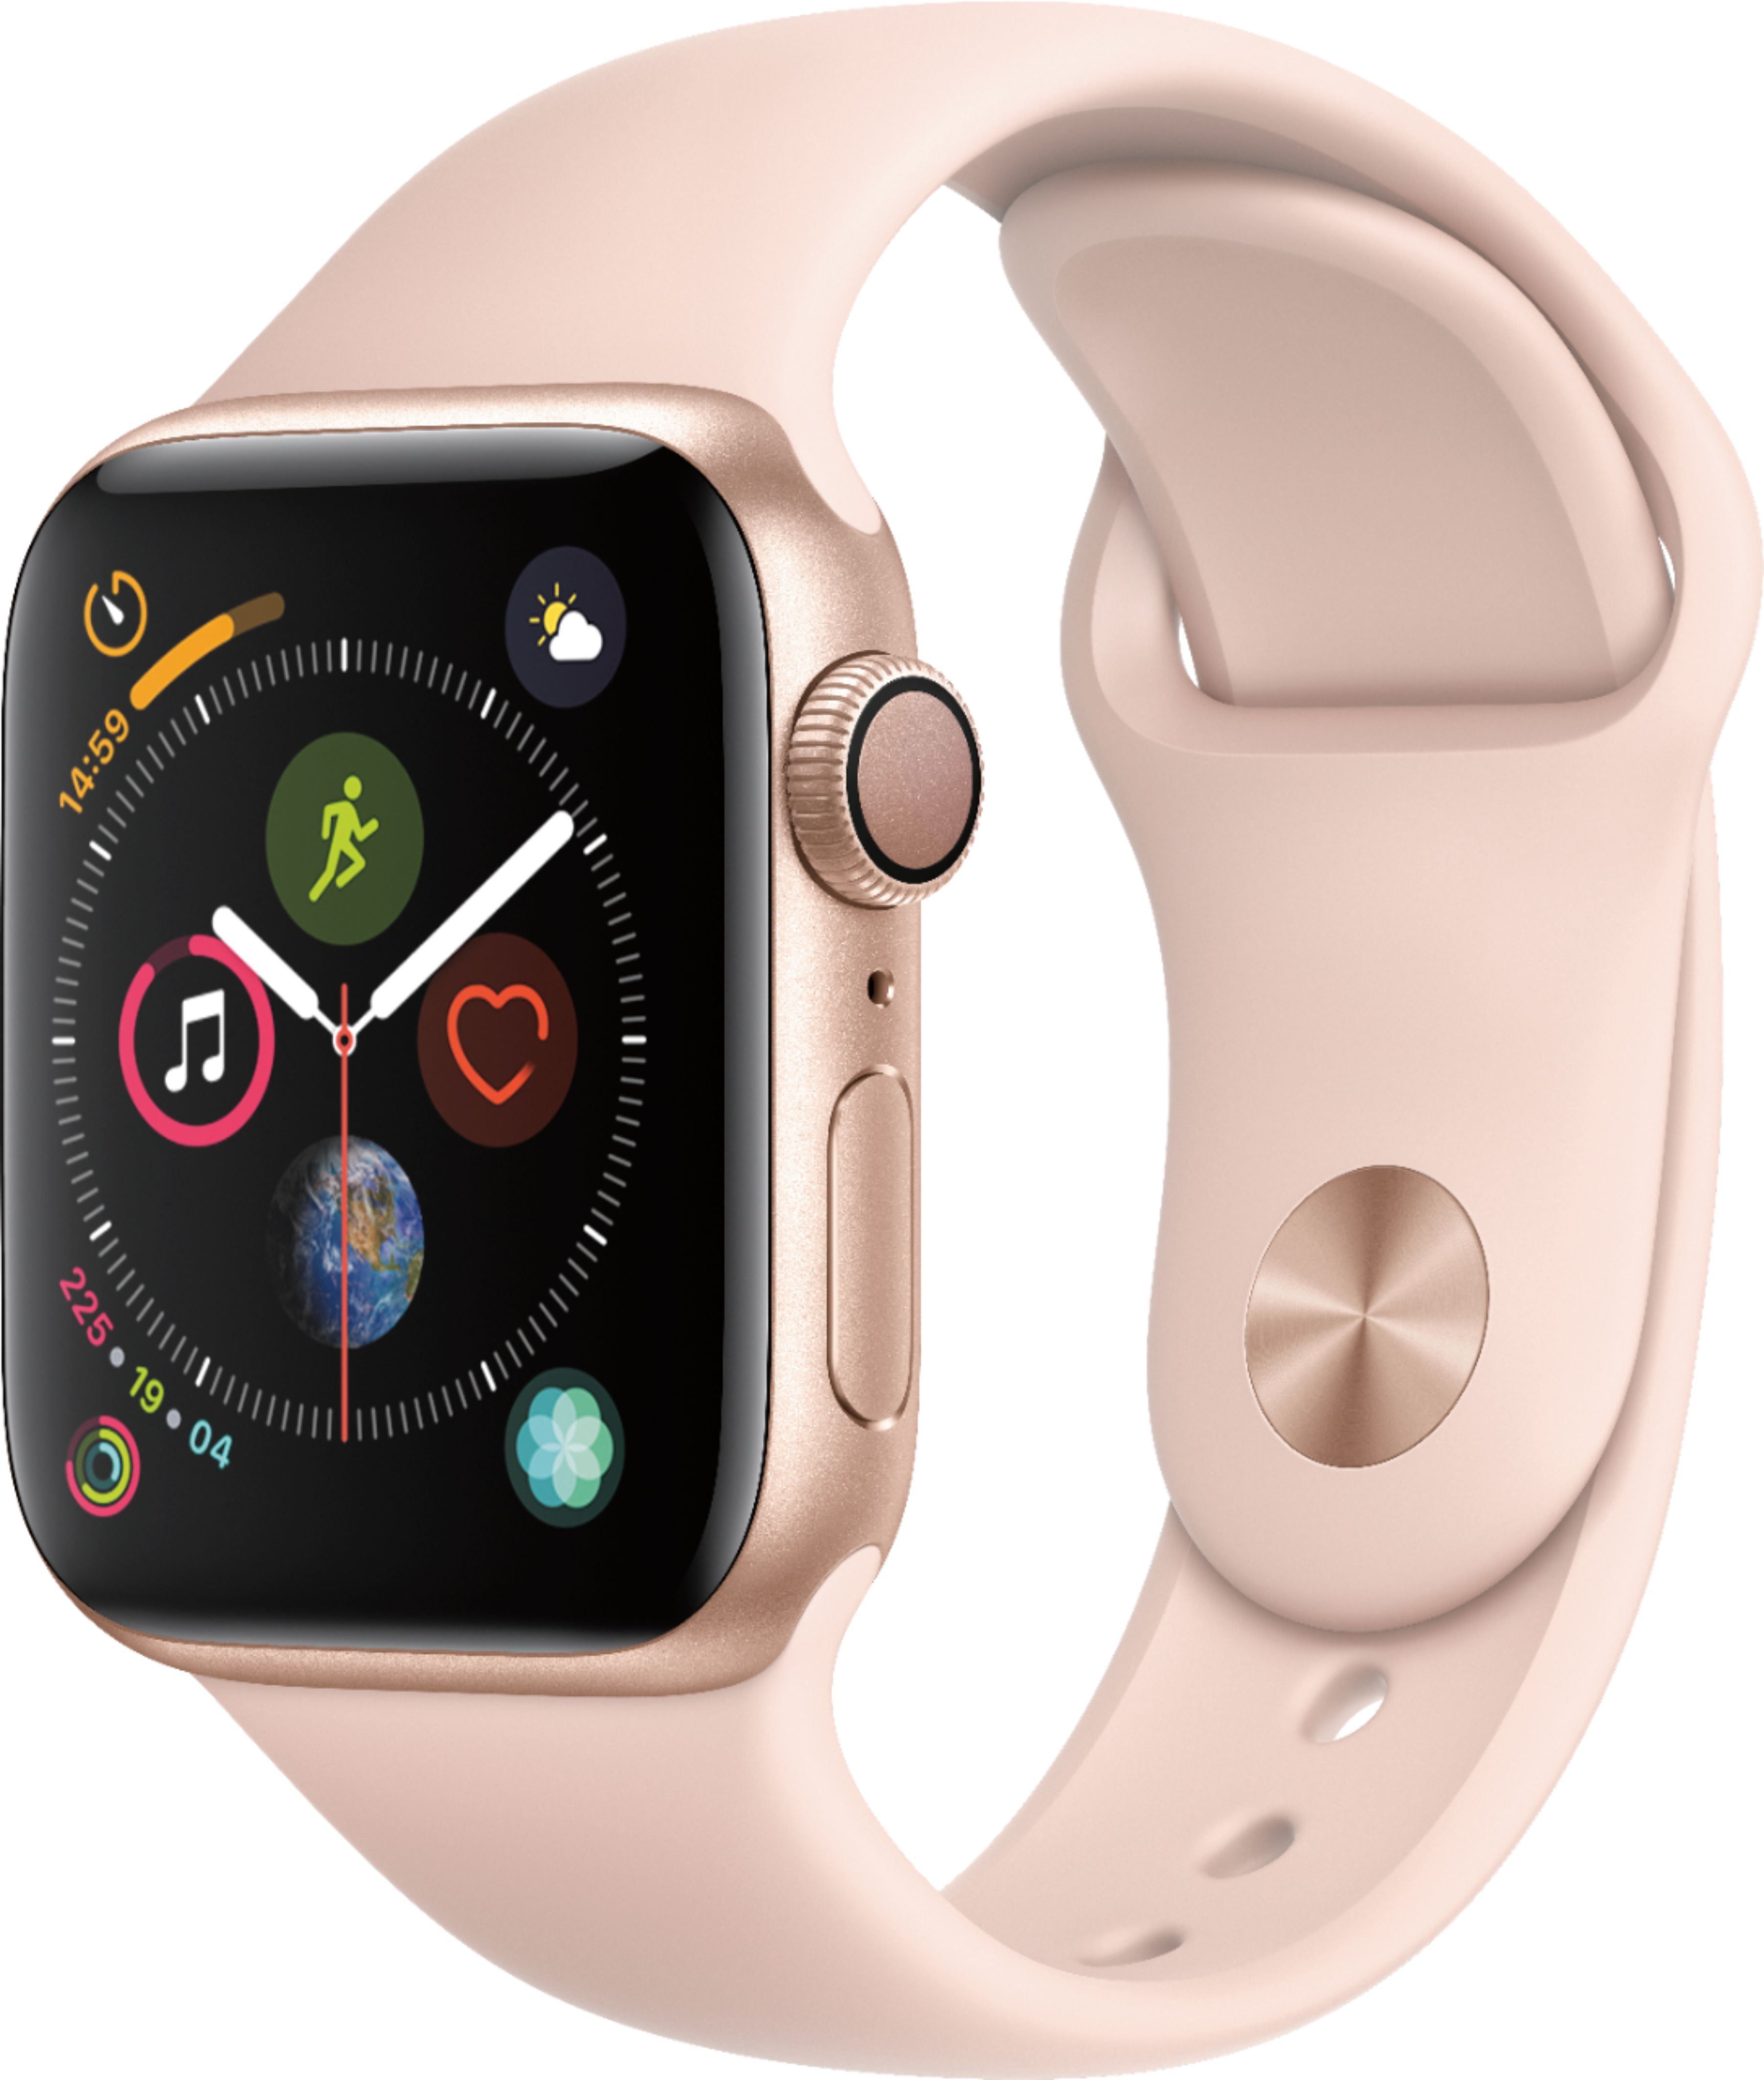 Apple Watch Series 4 (GPS) 40mm Gold Aluminum Case with Pink Sand Sport Band - Gold Aluminum was $349.0 now $244.99 (30.0% off)